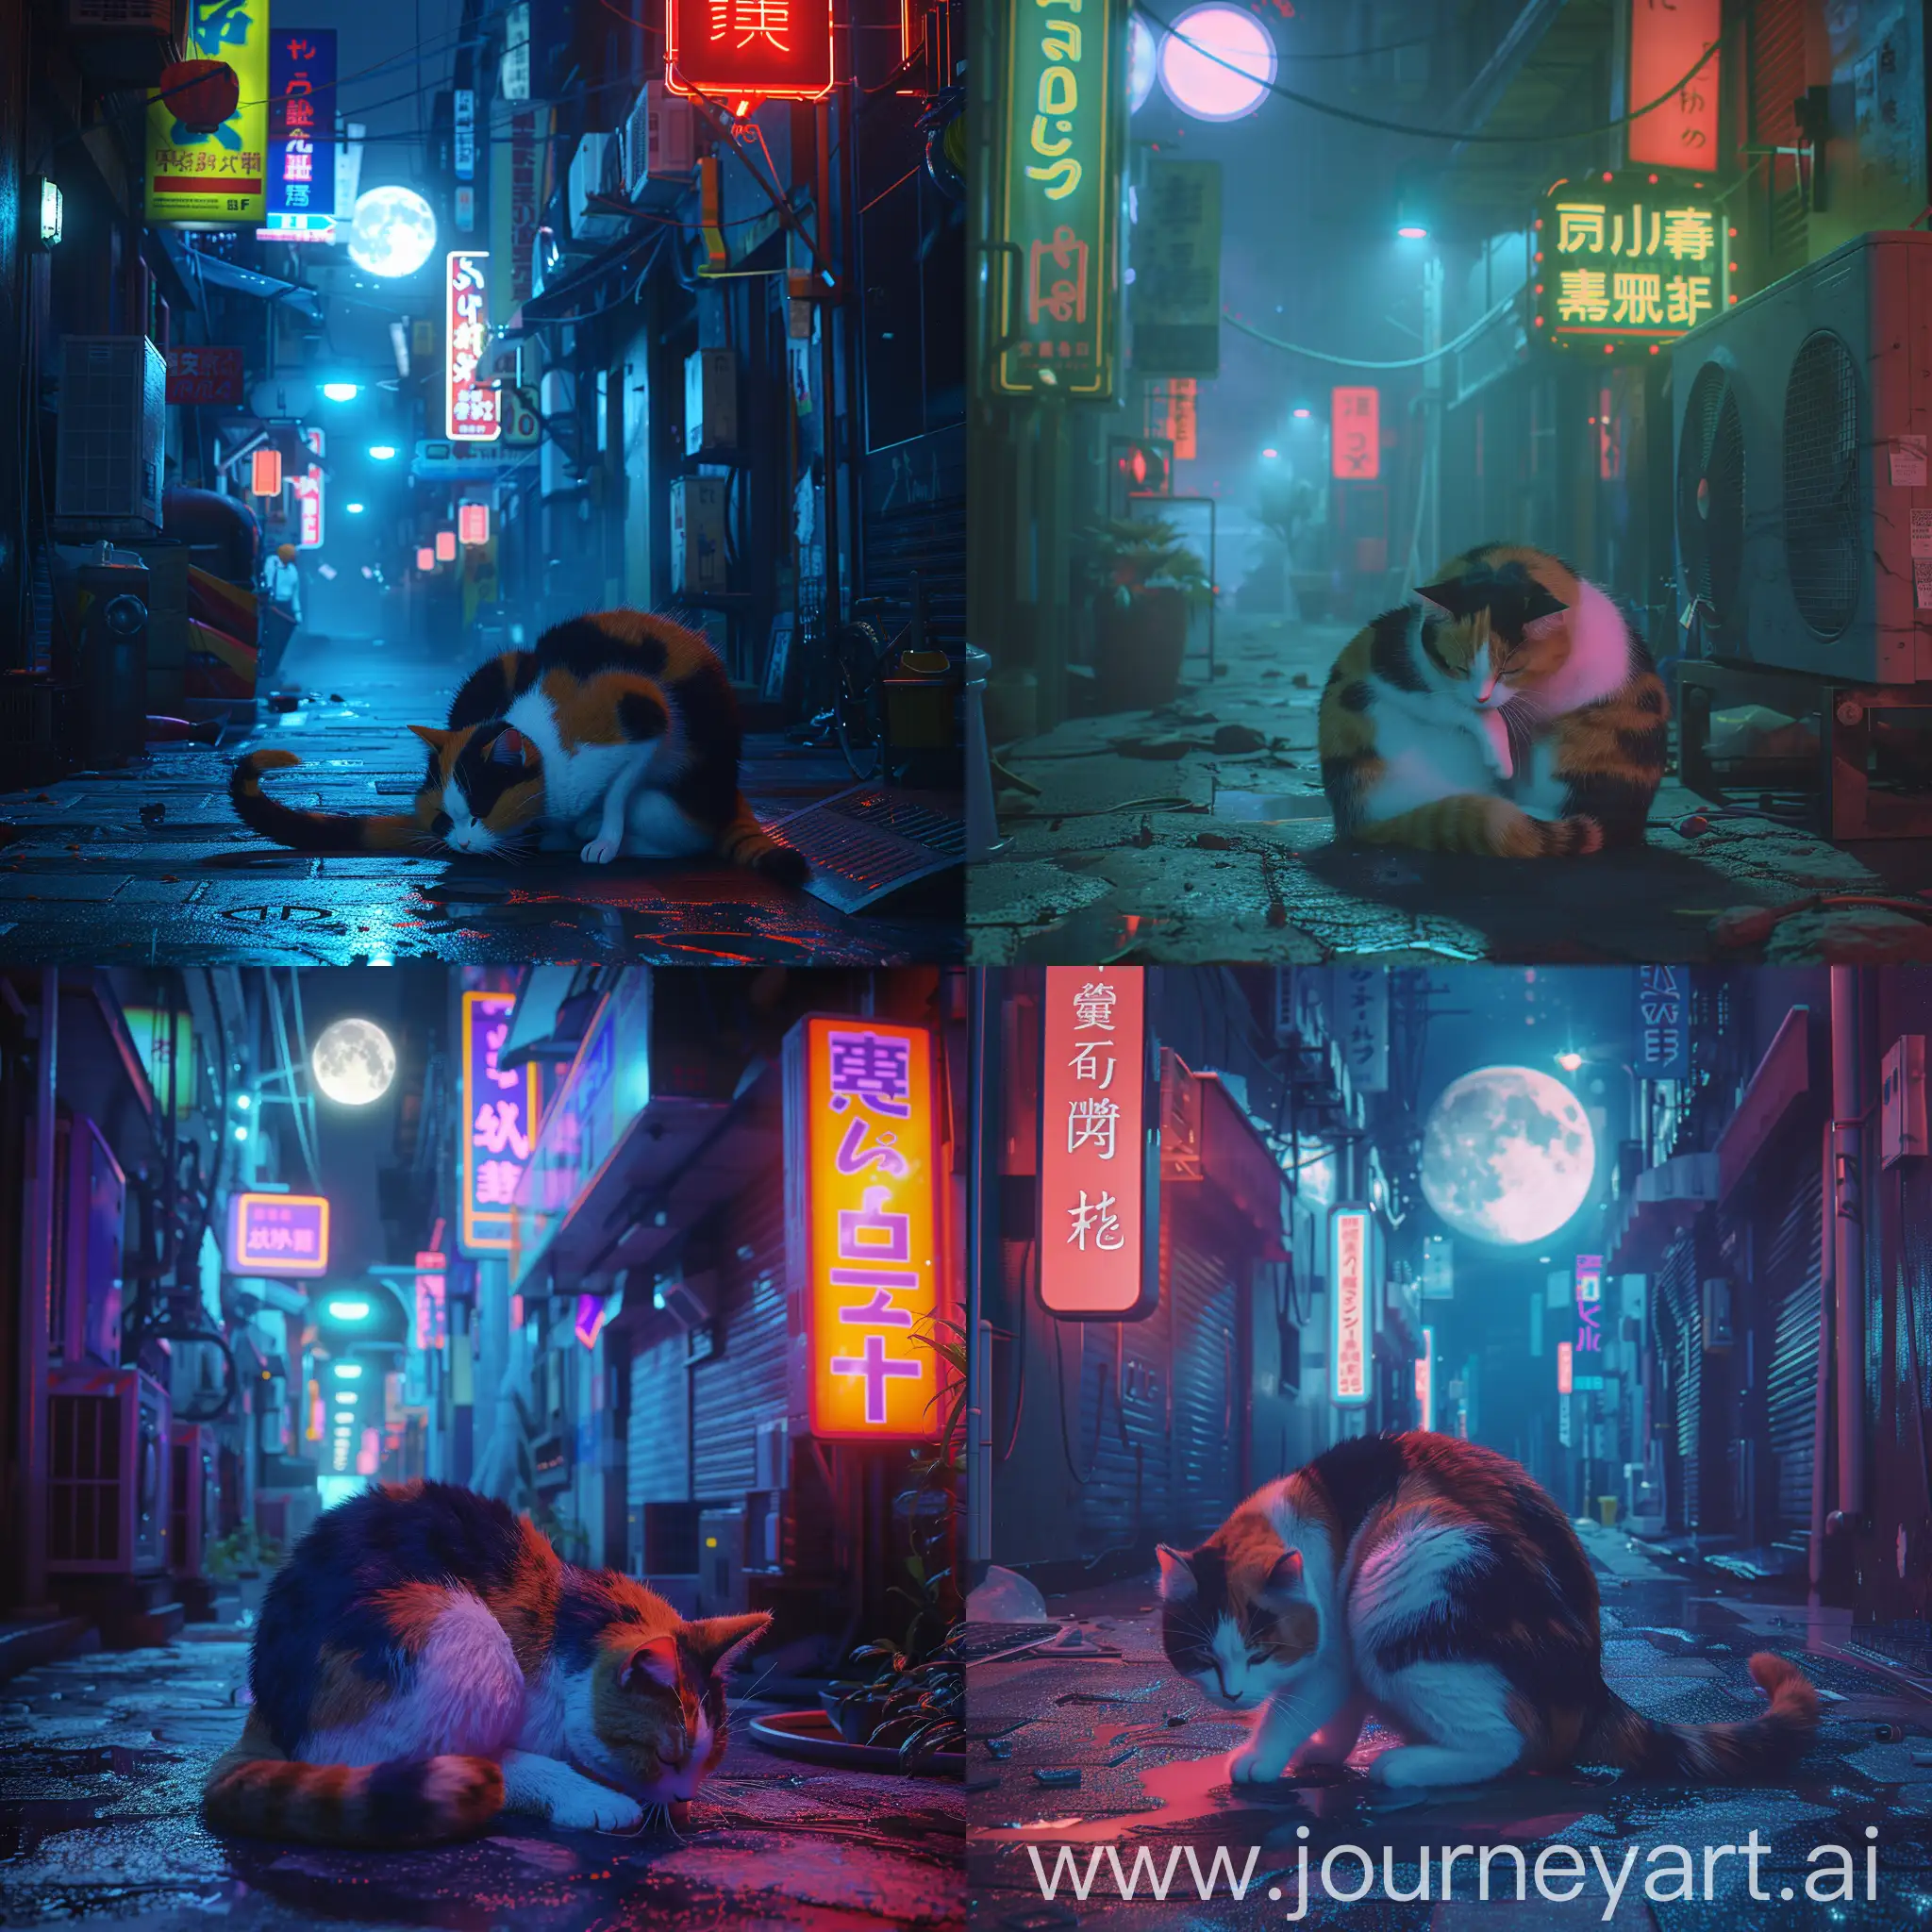 japanese futuristic bladerunner 2044 style, a plump cute calico cat plonked on her butt, cleaning herself in a pristinely clean urban alley, at night with afull moon, and lit by neon signs in japanese